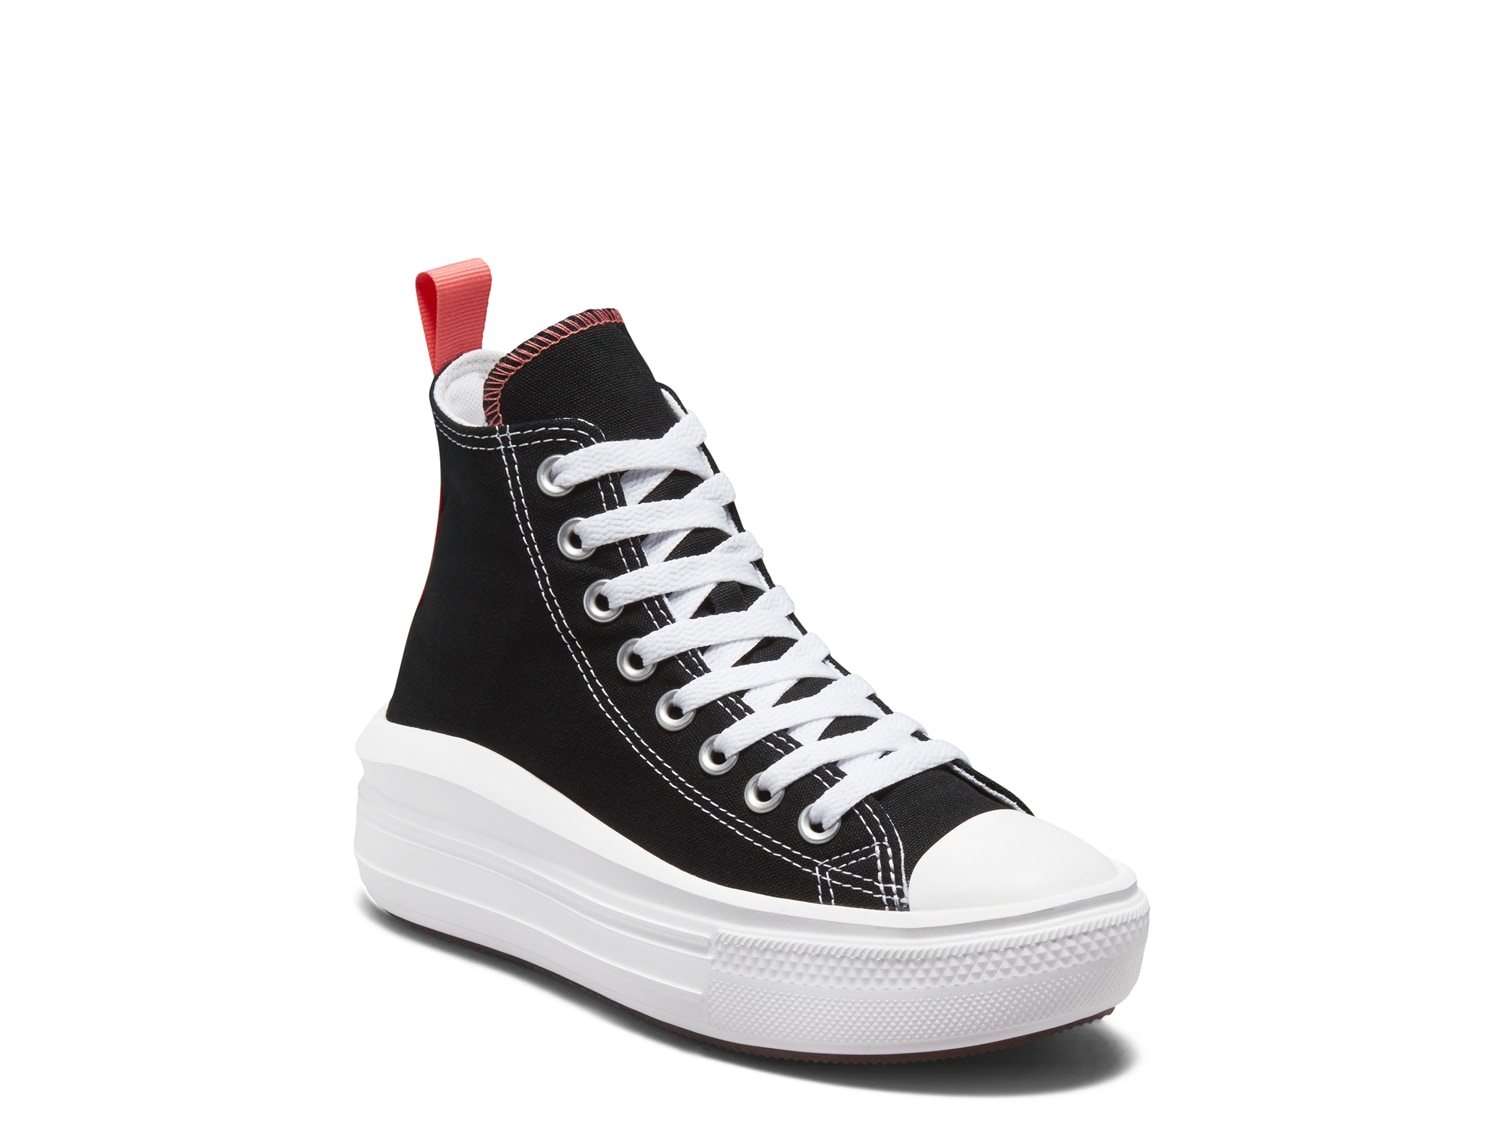 Converse Chuck Taylor All Star Move High-Top Sneaker - Kids' - Free ...